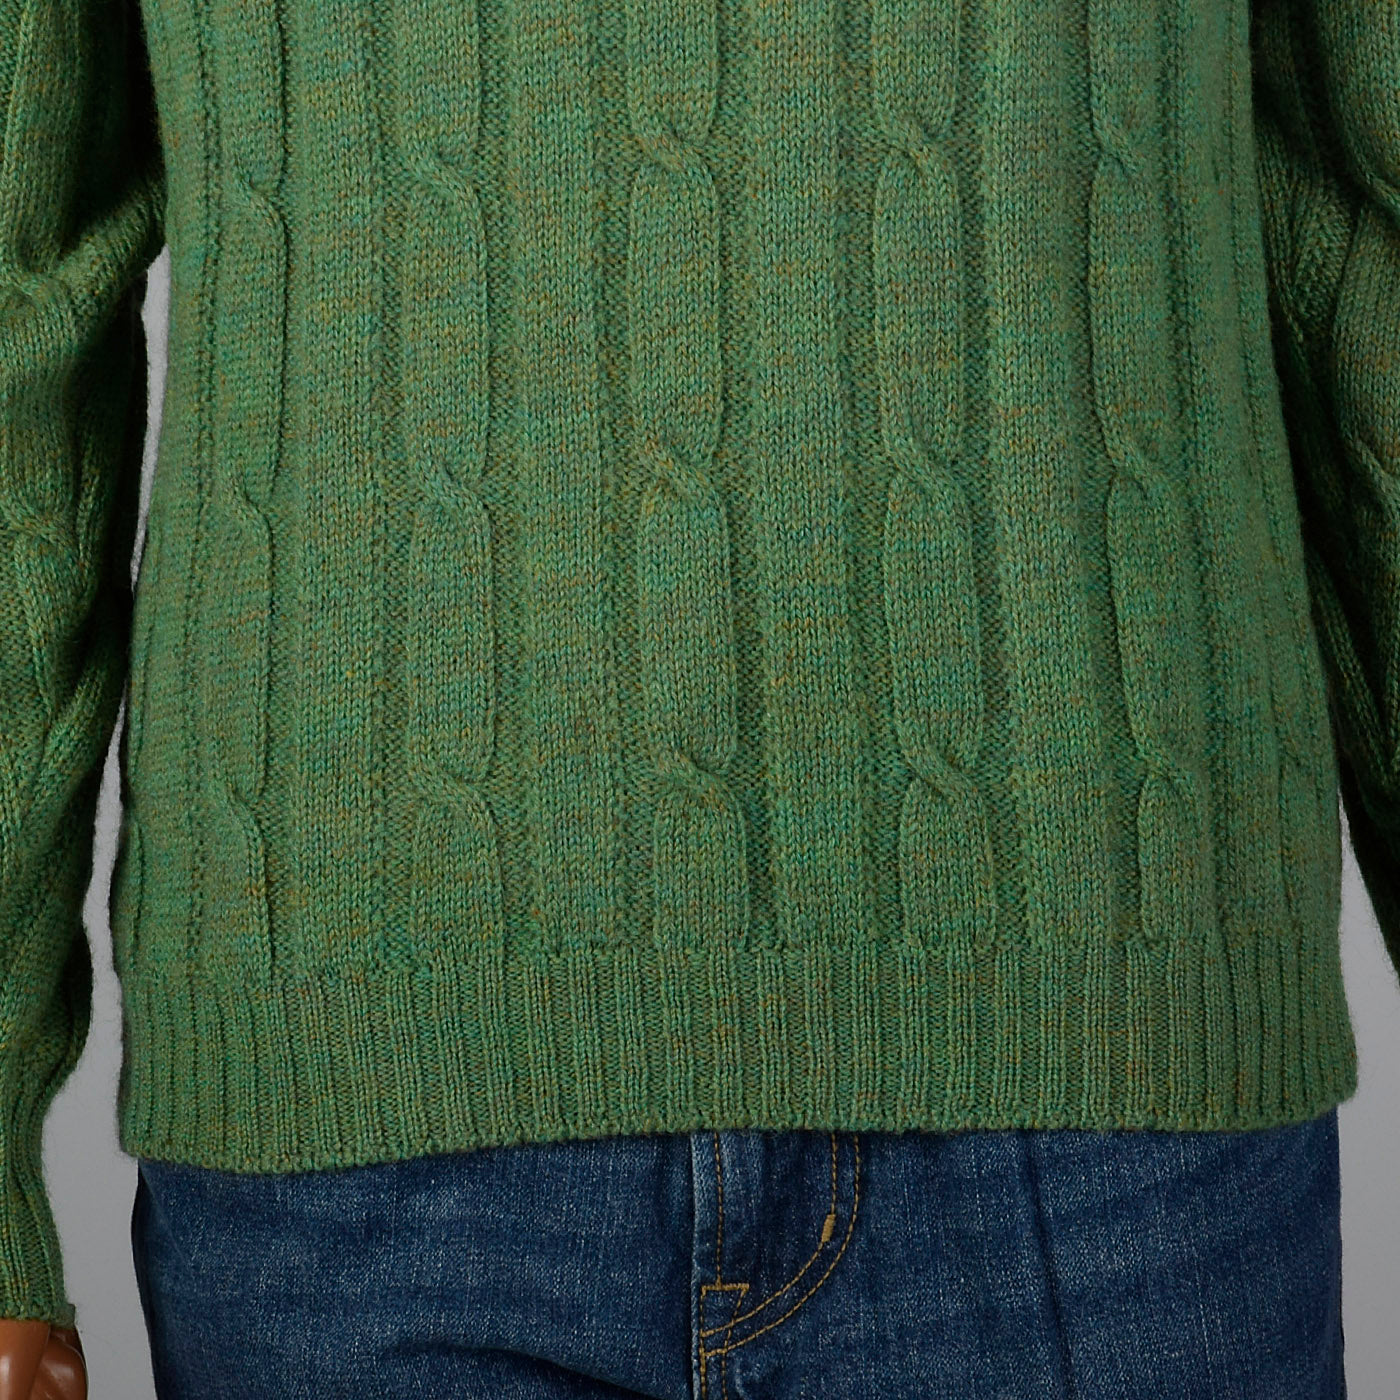 1960s Mens Green and Brown Cable Knit Sweater